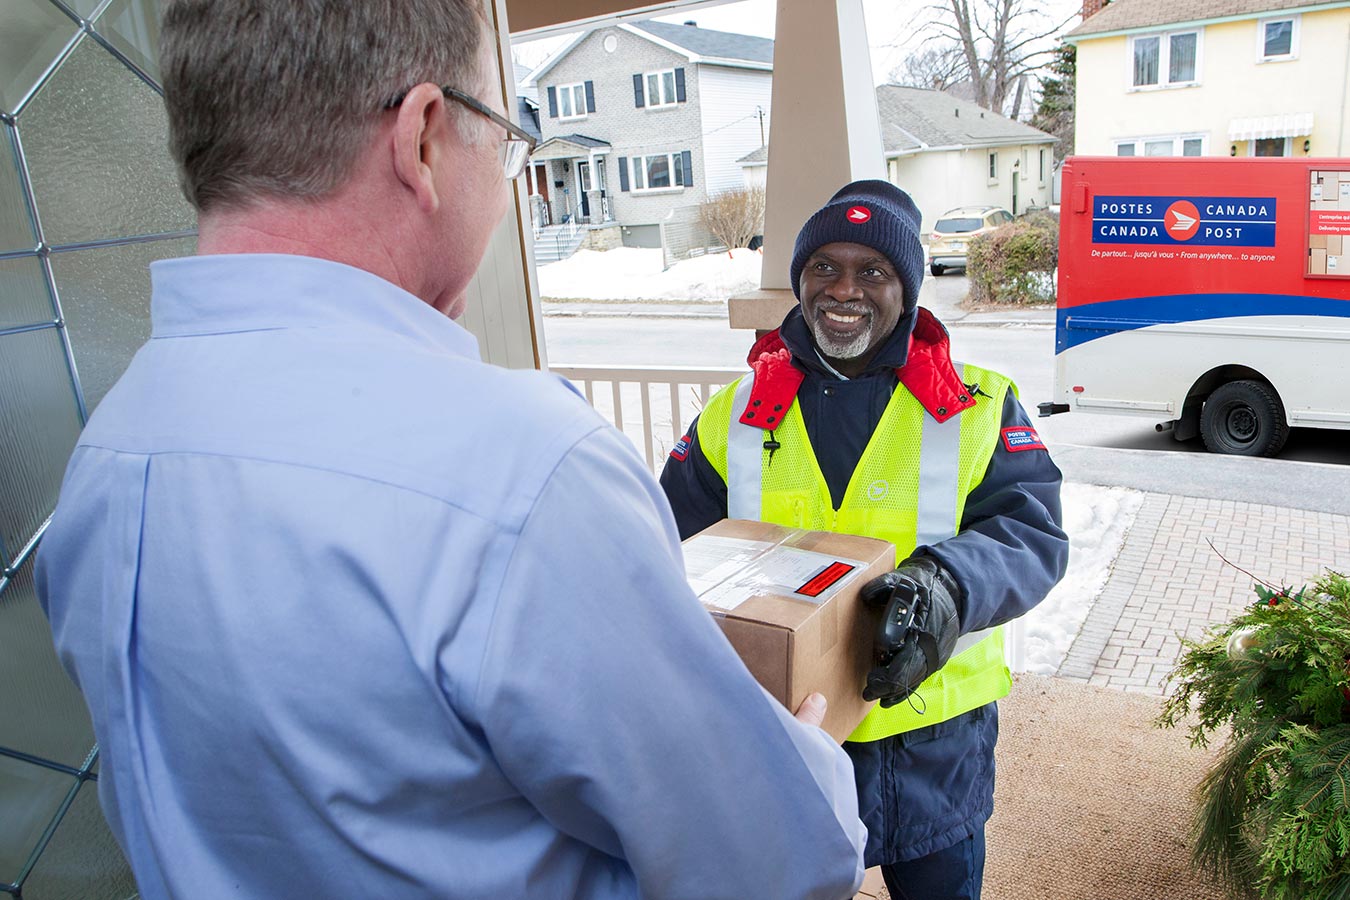 Delivery agent handing a package to a man